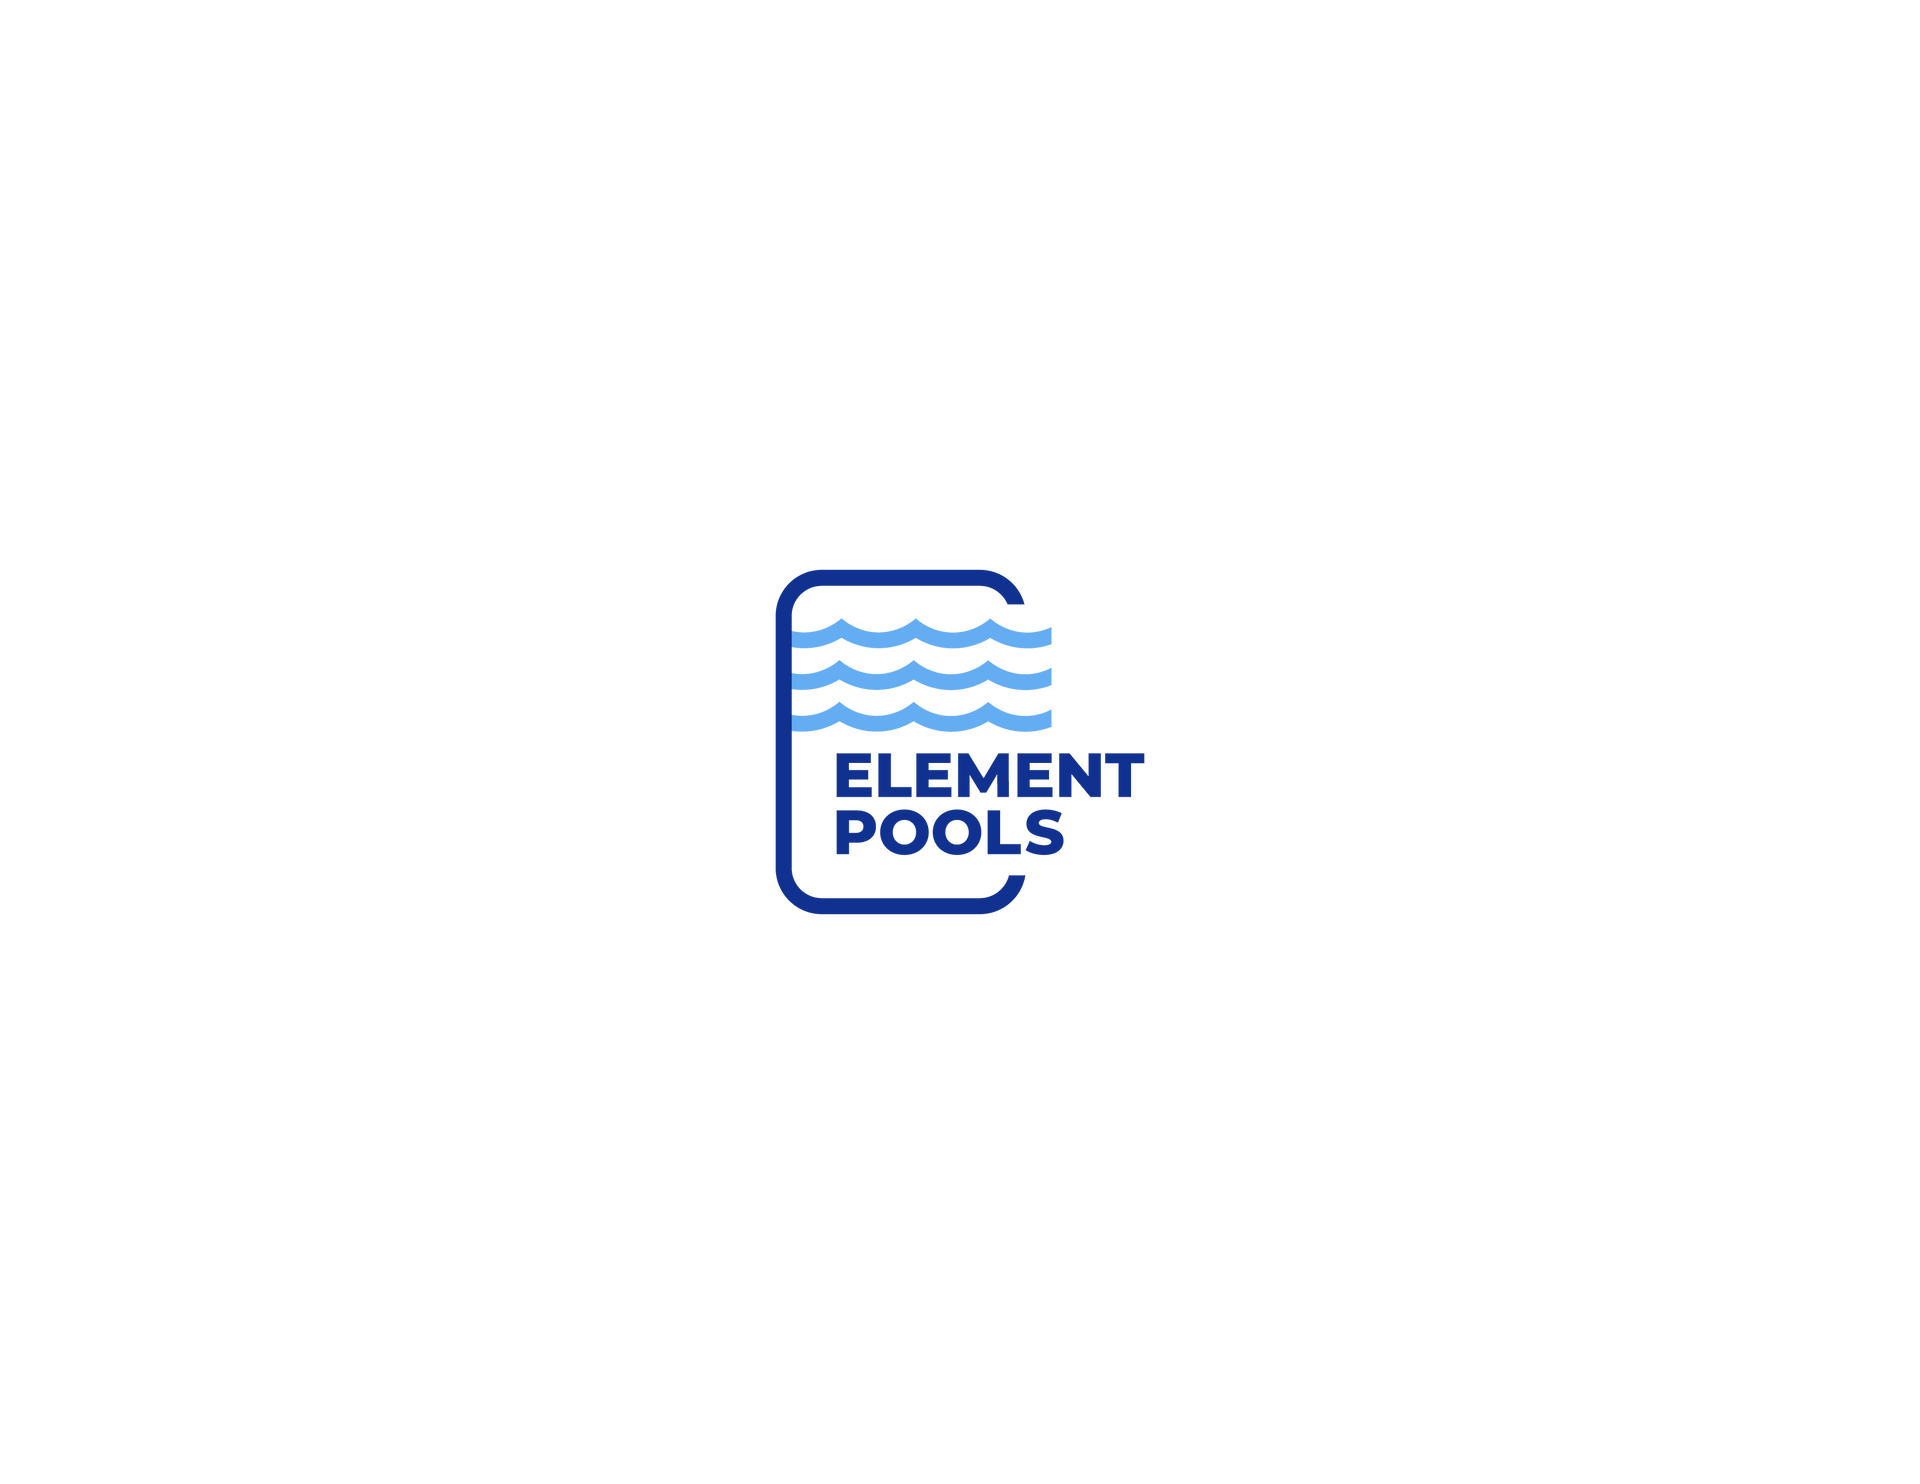 A logo for a company called element pools